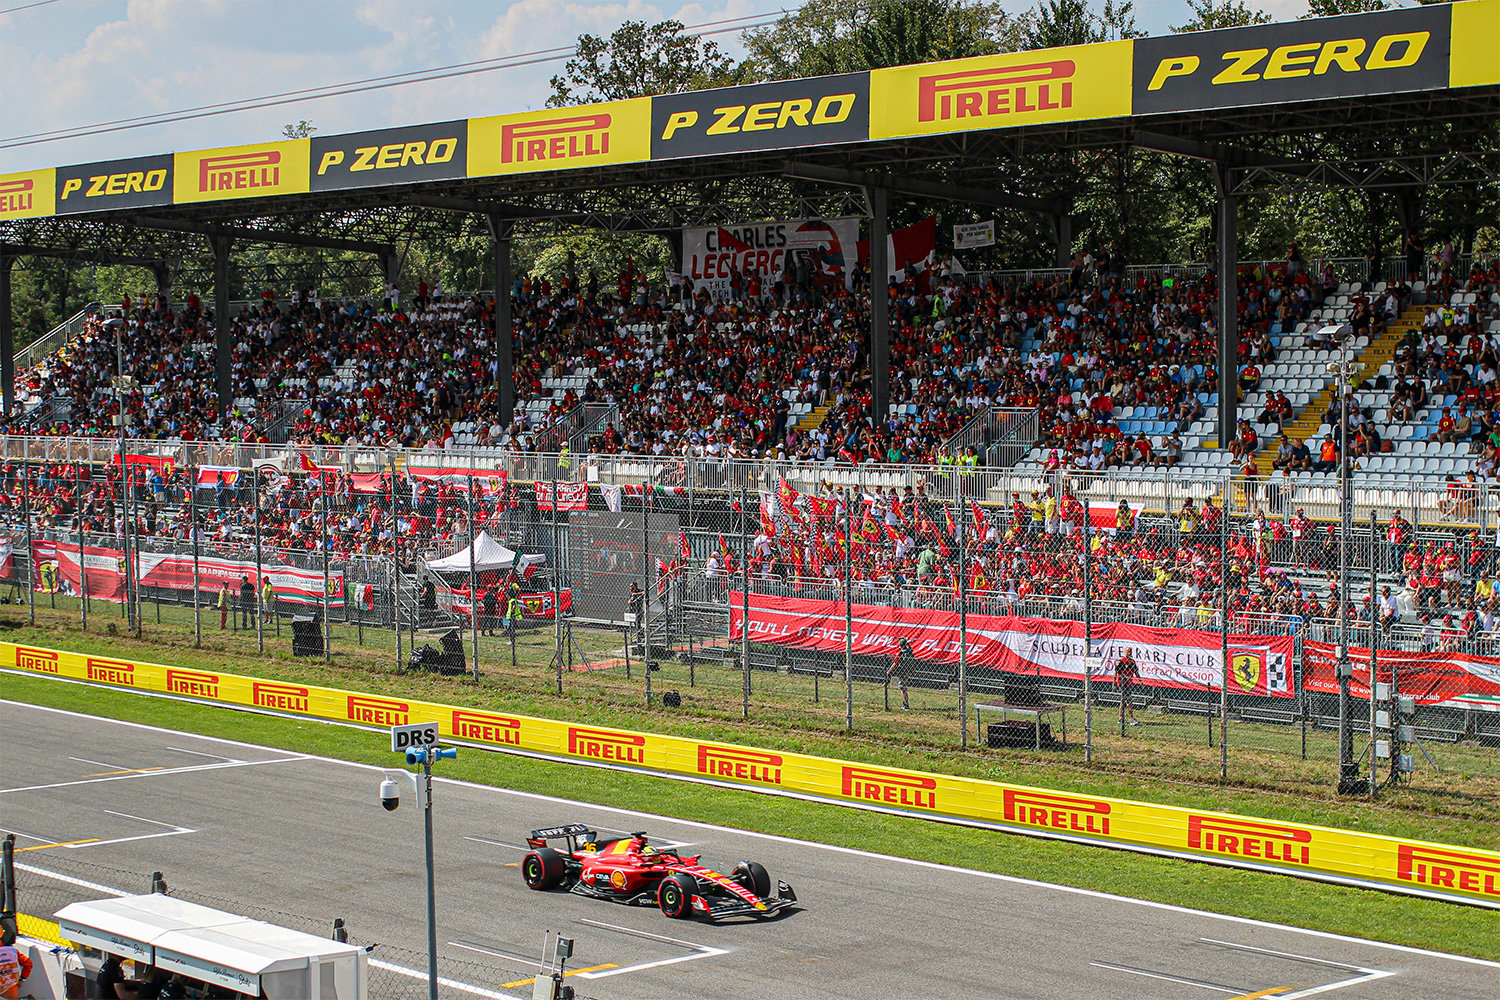 Fans in the stands at the Monza Circuit for the Italian Grand Prix 2023